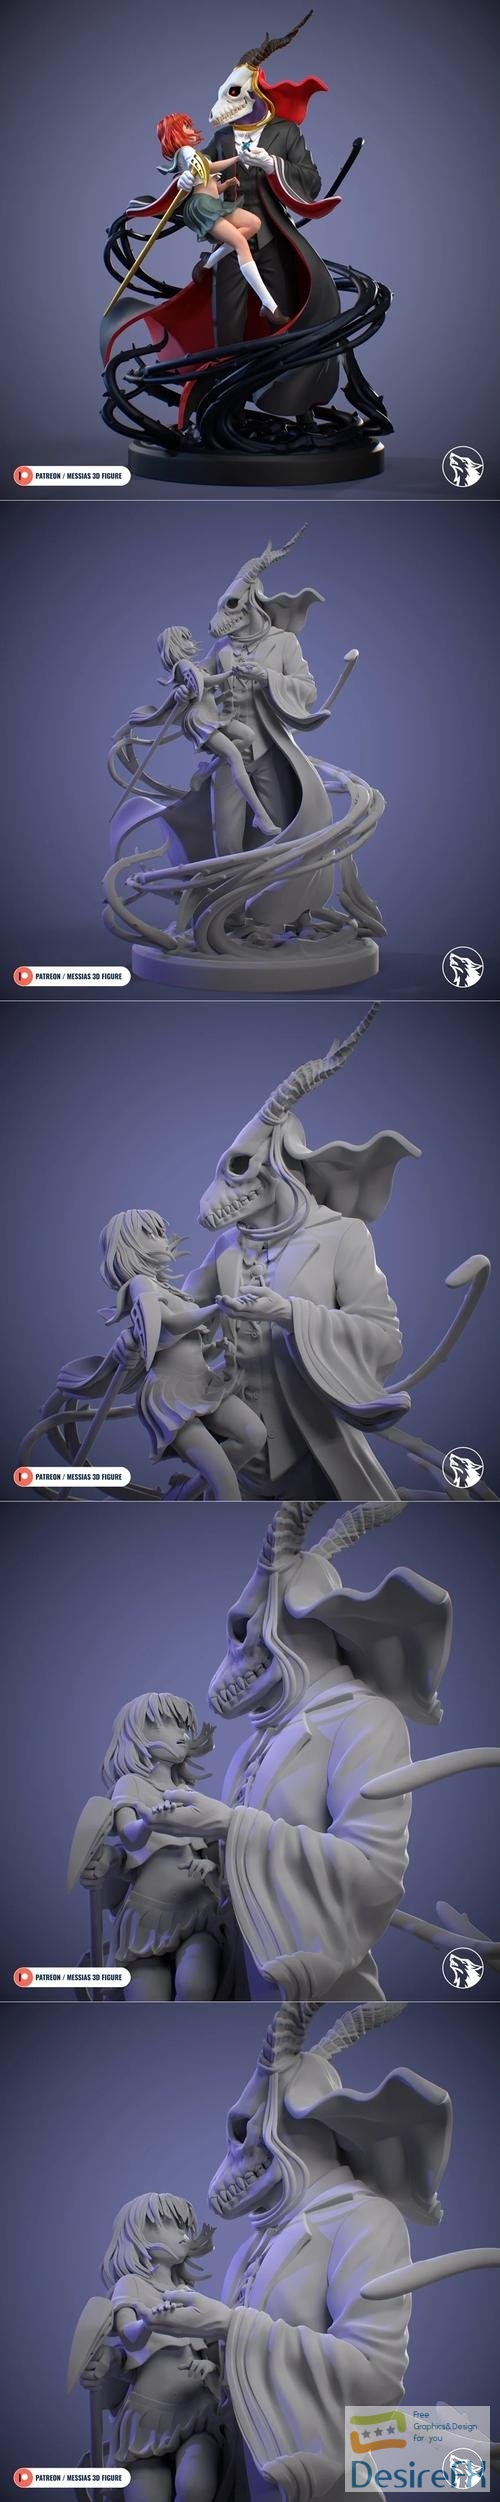 Elias and Chise – 3D Print